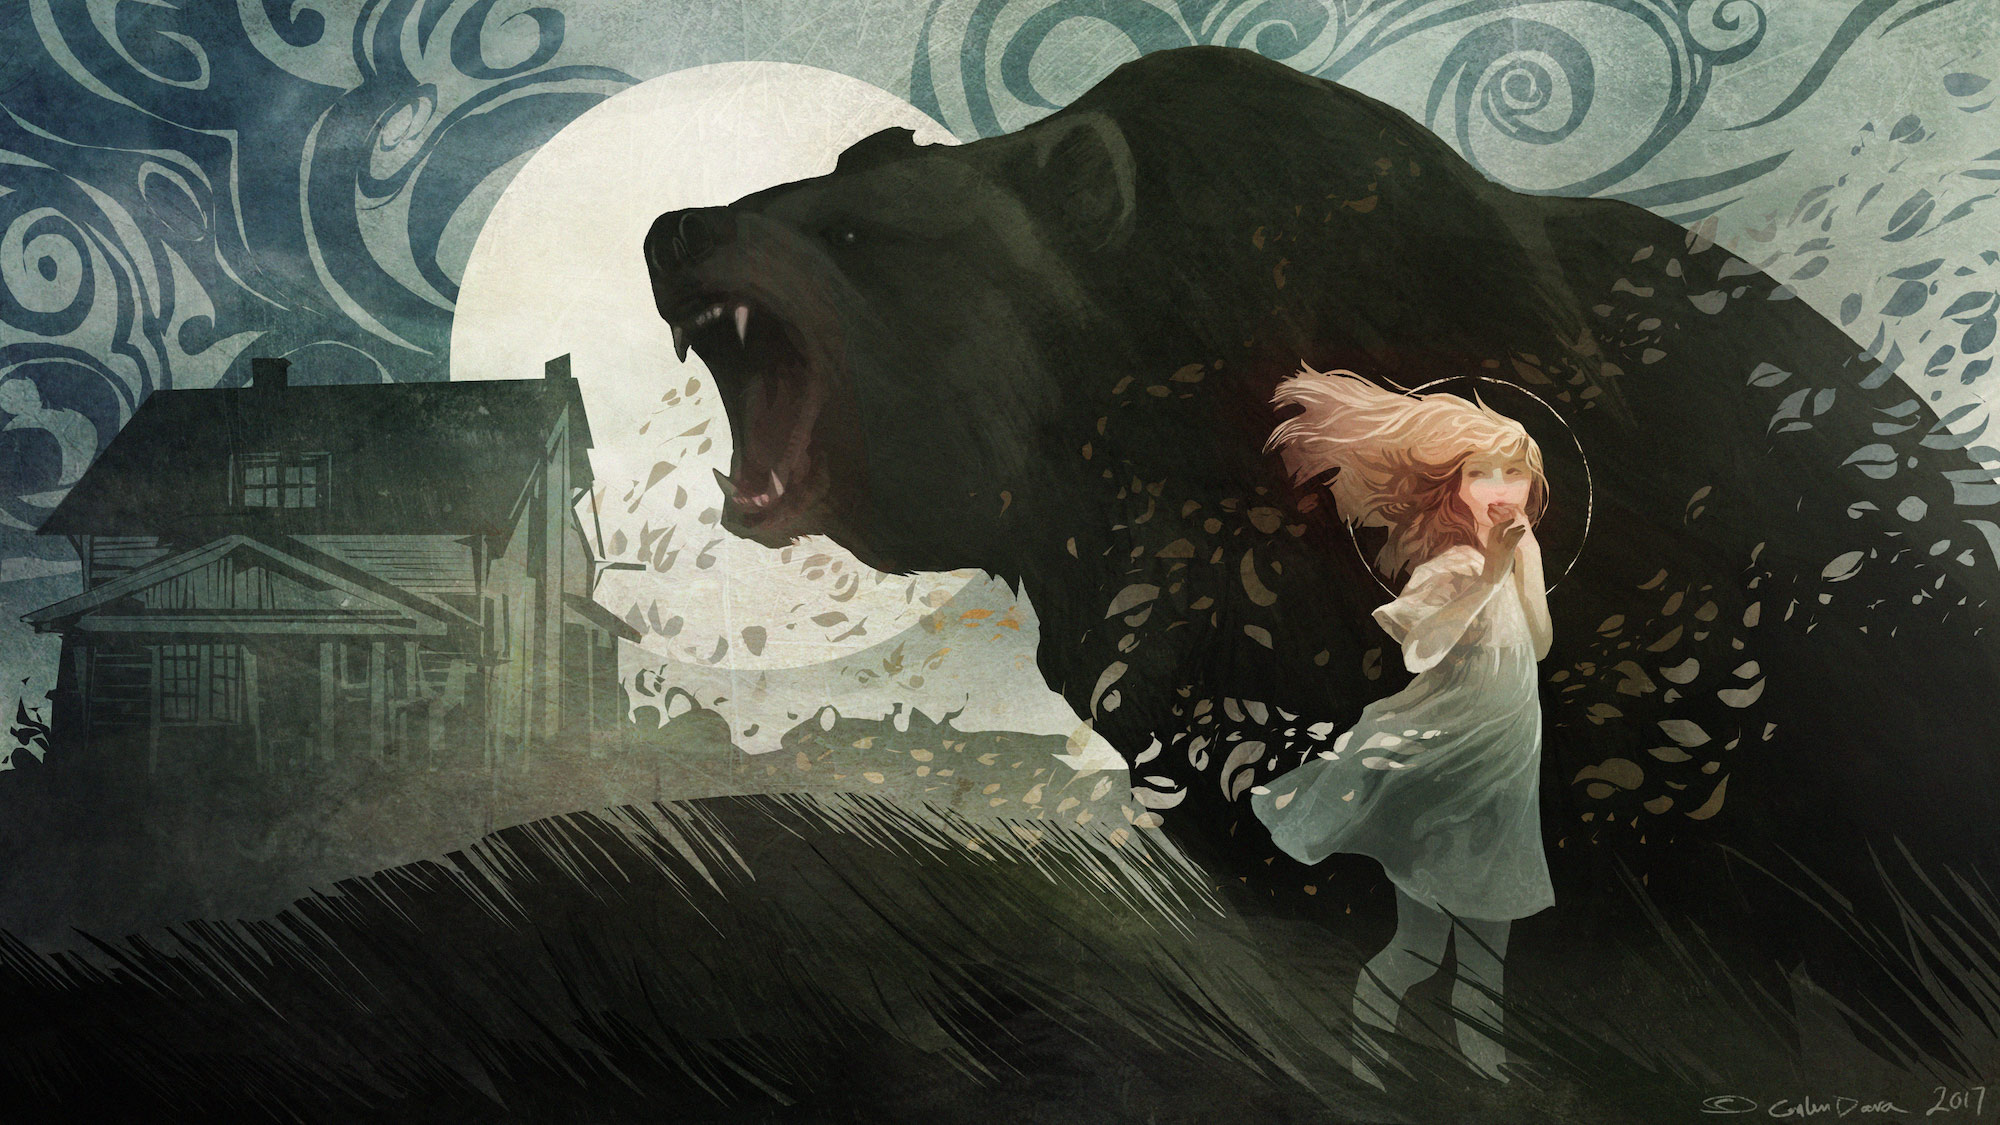 A young girl stands in front of a roaring bear. In the background is a slightly run down house and the moon, looming large above everything.